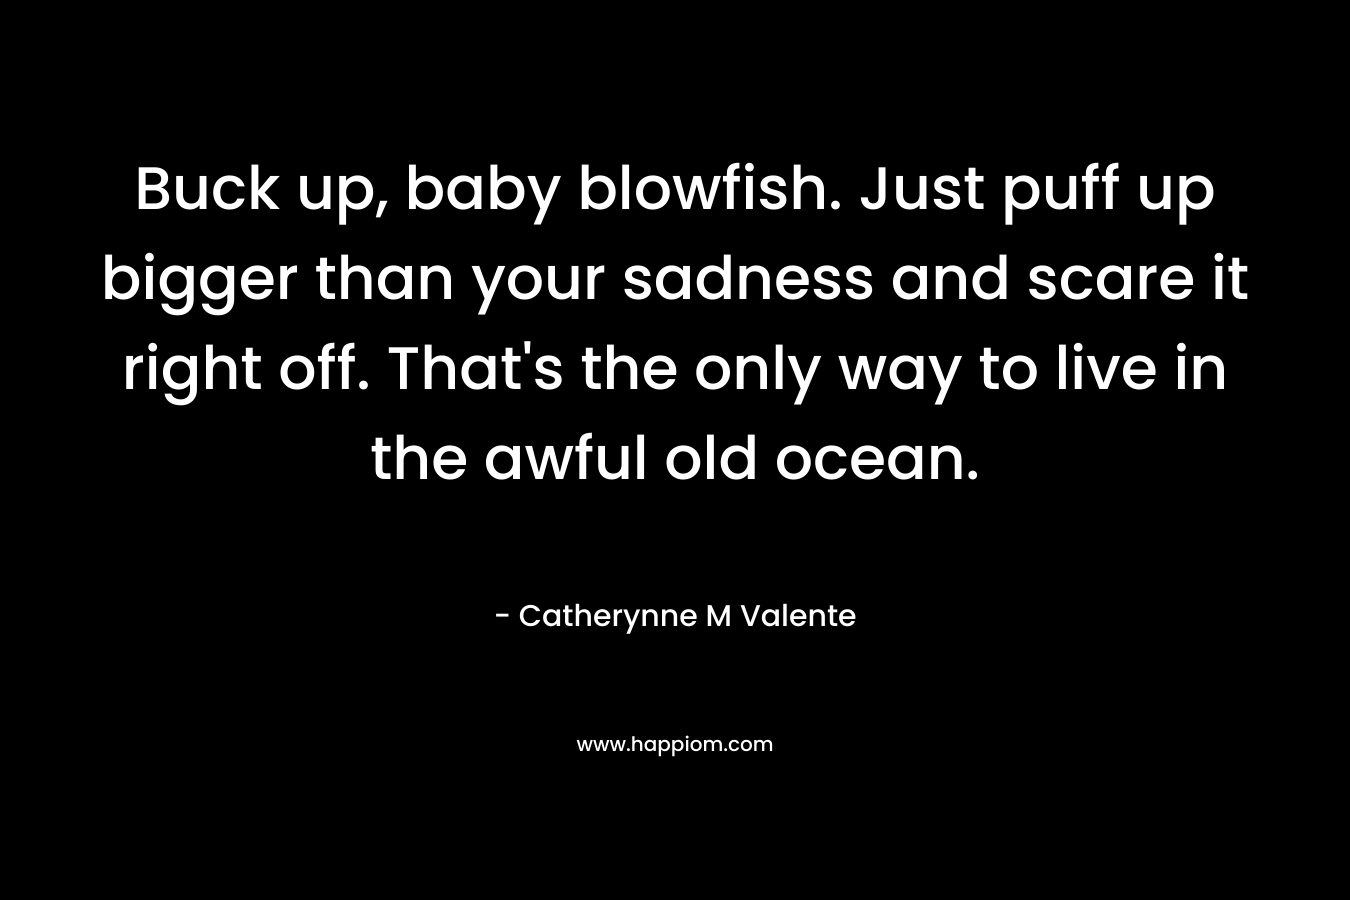 Buck up, baby blowfish. Just puff up bigger than your sadness and scare it right off. That’s the only way to live in the awful old ocean. – Catherynne M Valente